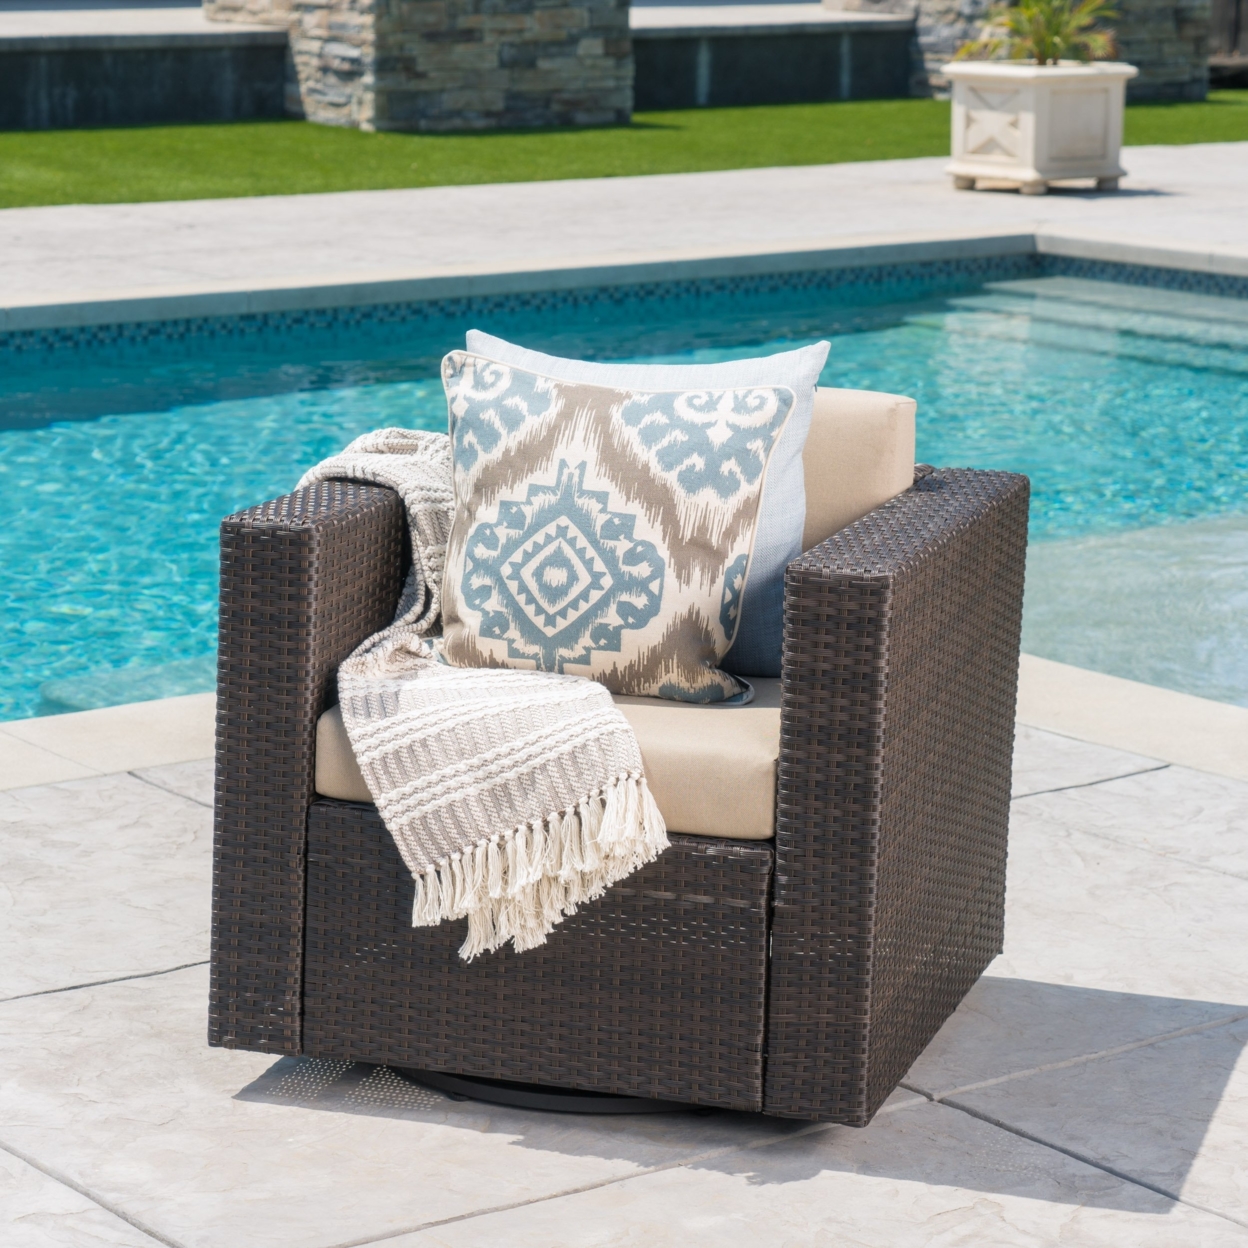 Venice Outdoor Wicker Swivel Club Chair With Water Resistant Cushions - Dark Brown/beige, Set Of 2